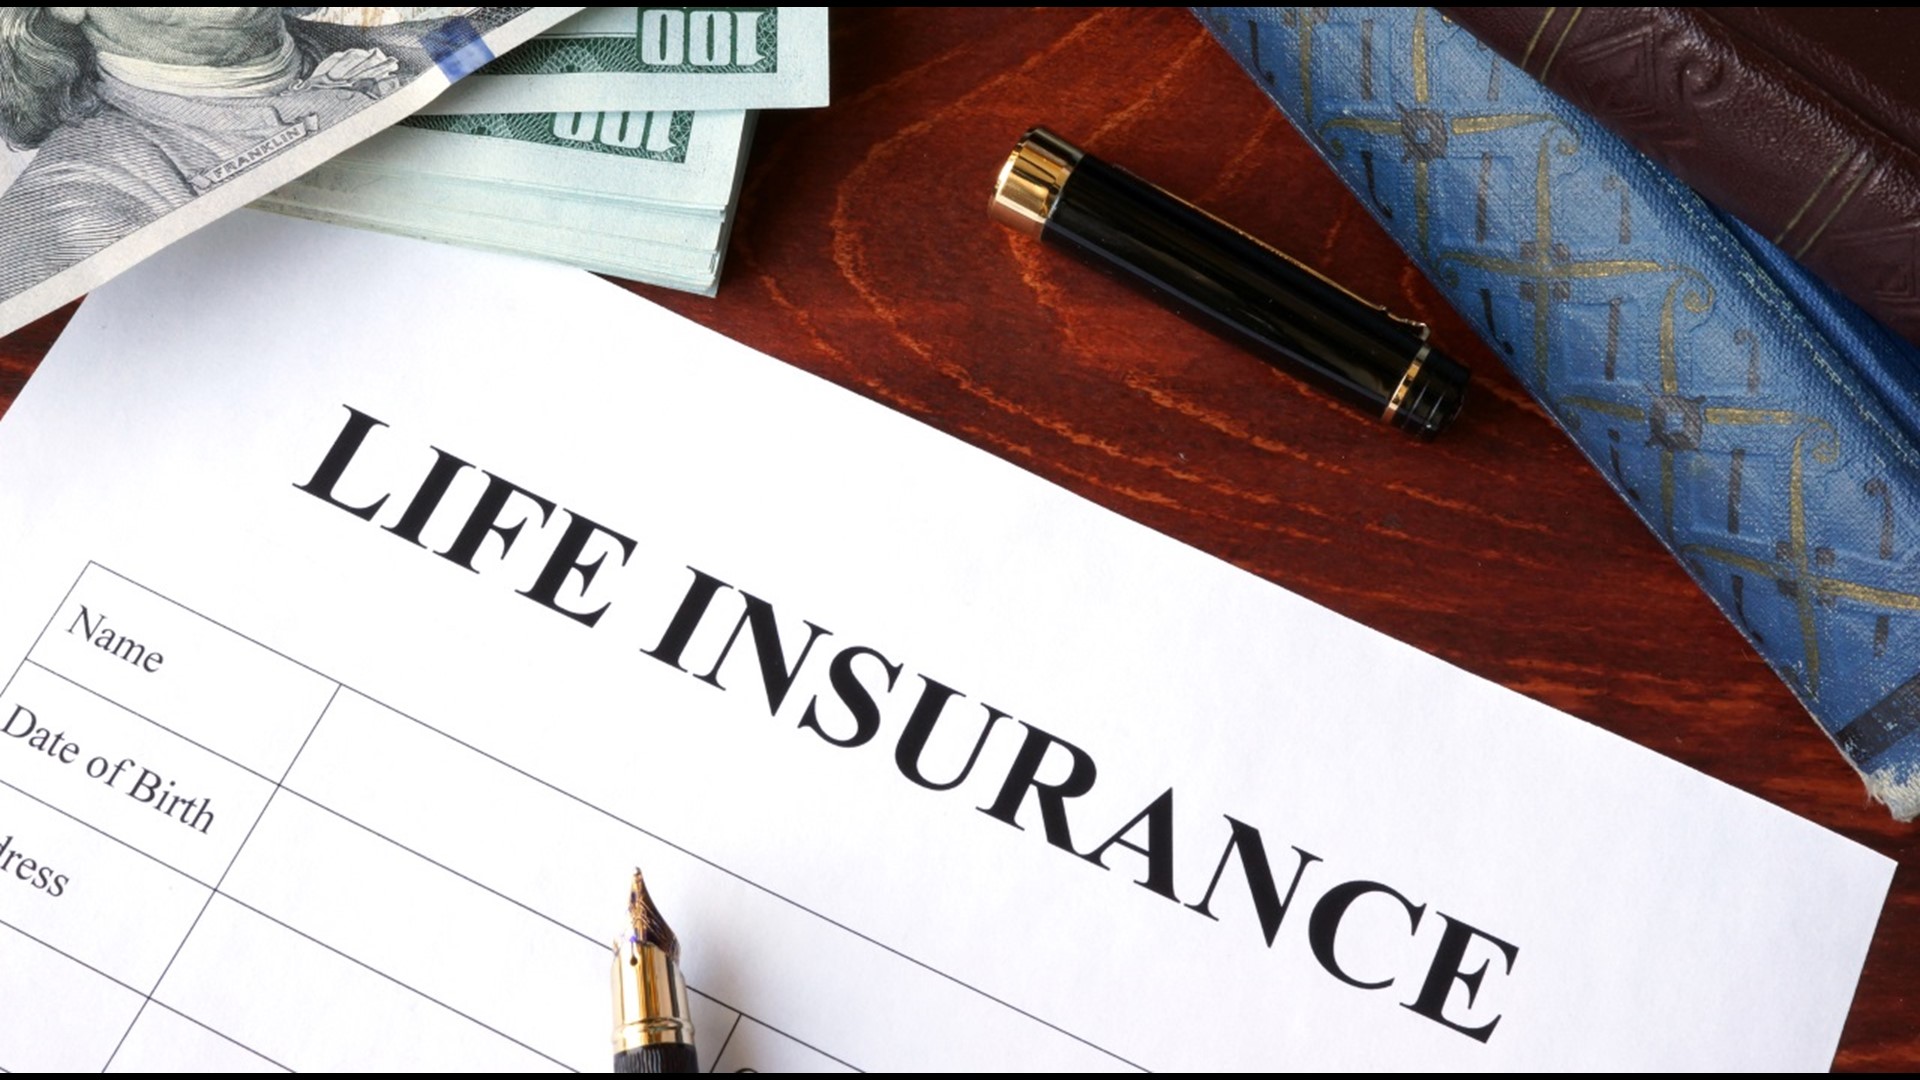 Dee Kerr with Total Retirements tells us why life insurance is so important and who needs it.